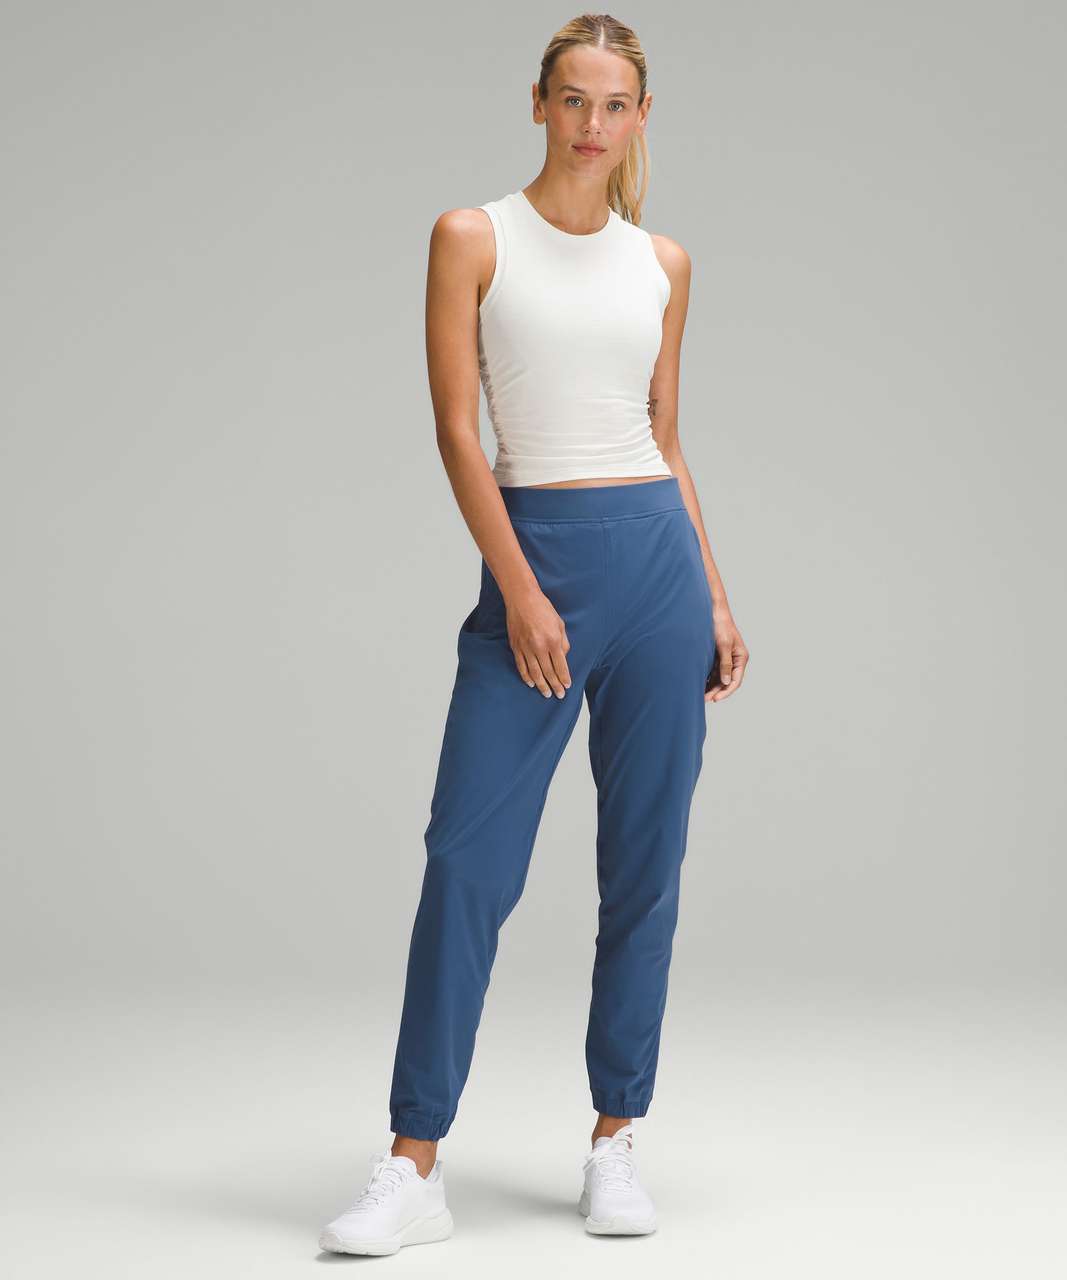 Lululemon Adapted State High-Rise Jogger *Full Length - Pitch Blue